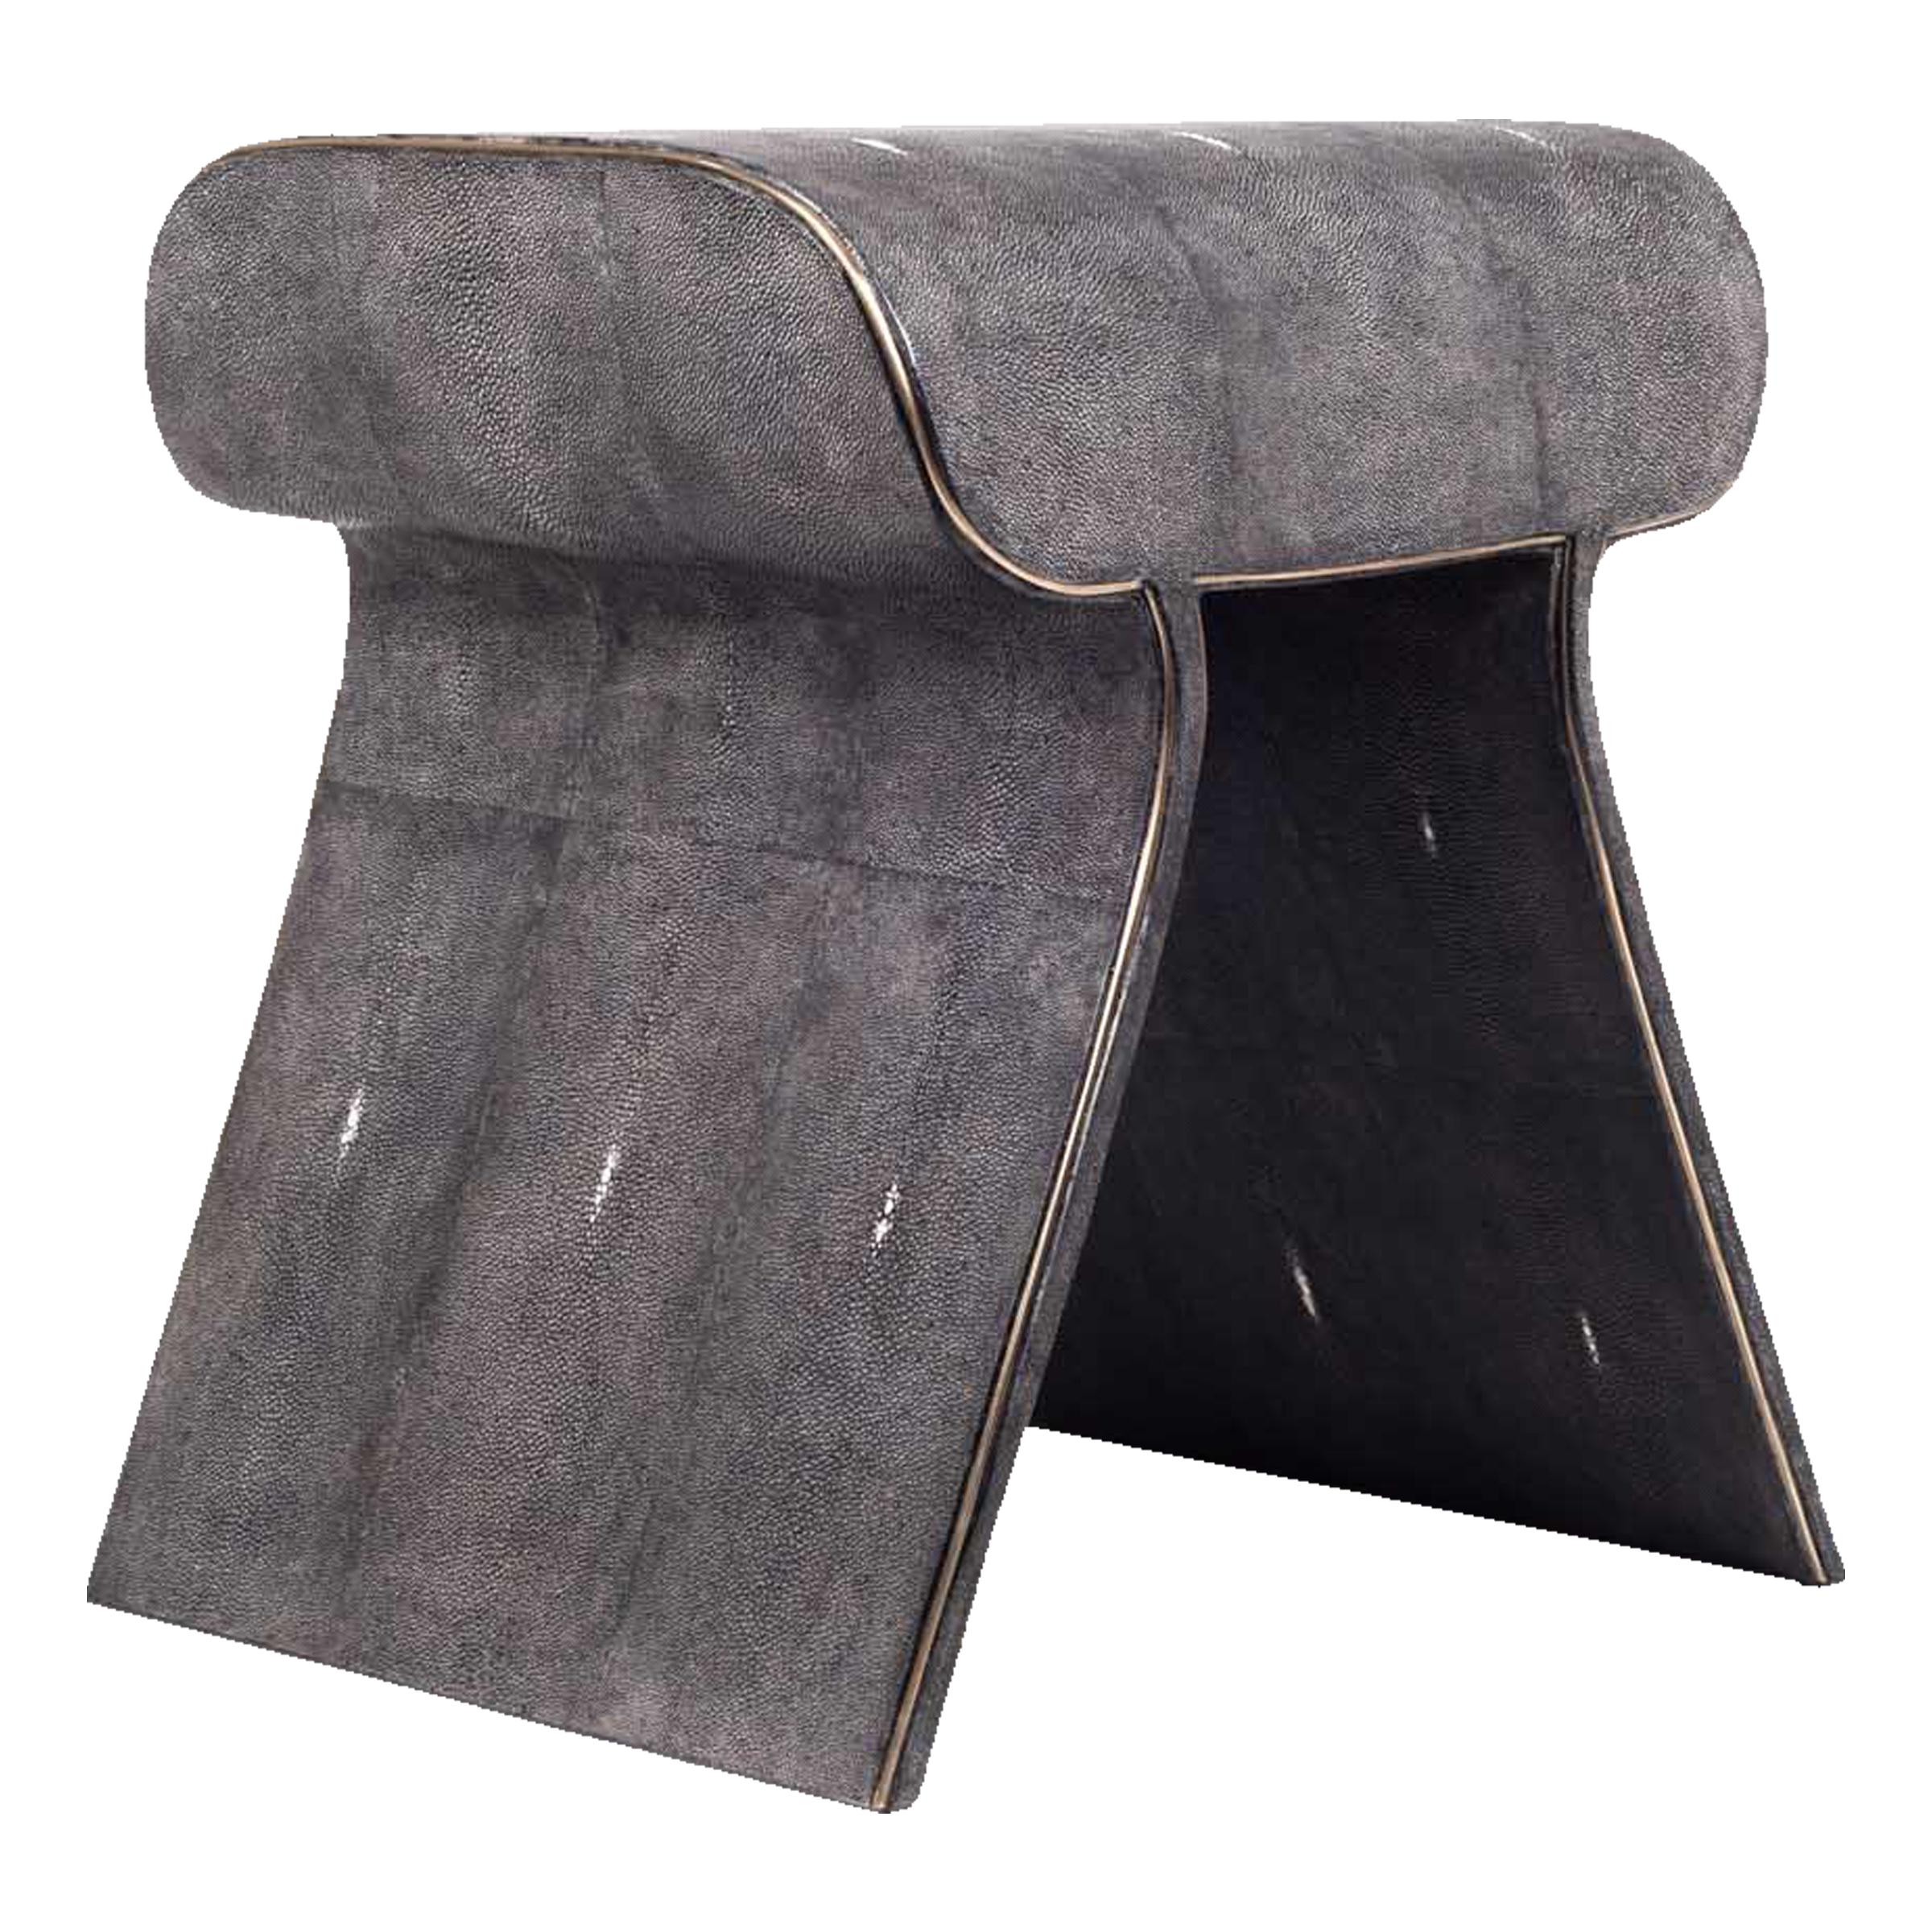 Hand-Crafted Dandy Stool in Cream Shagreen with Bronze-Patina Brass Details by Kifu, Paris For Sale